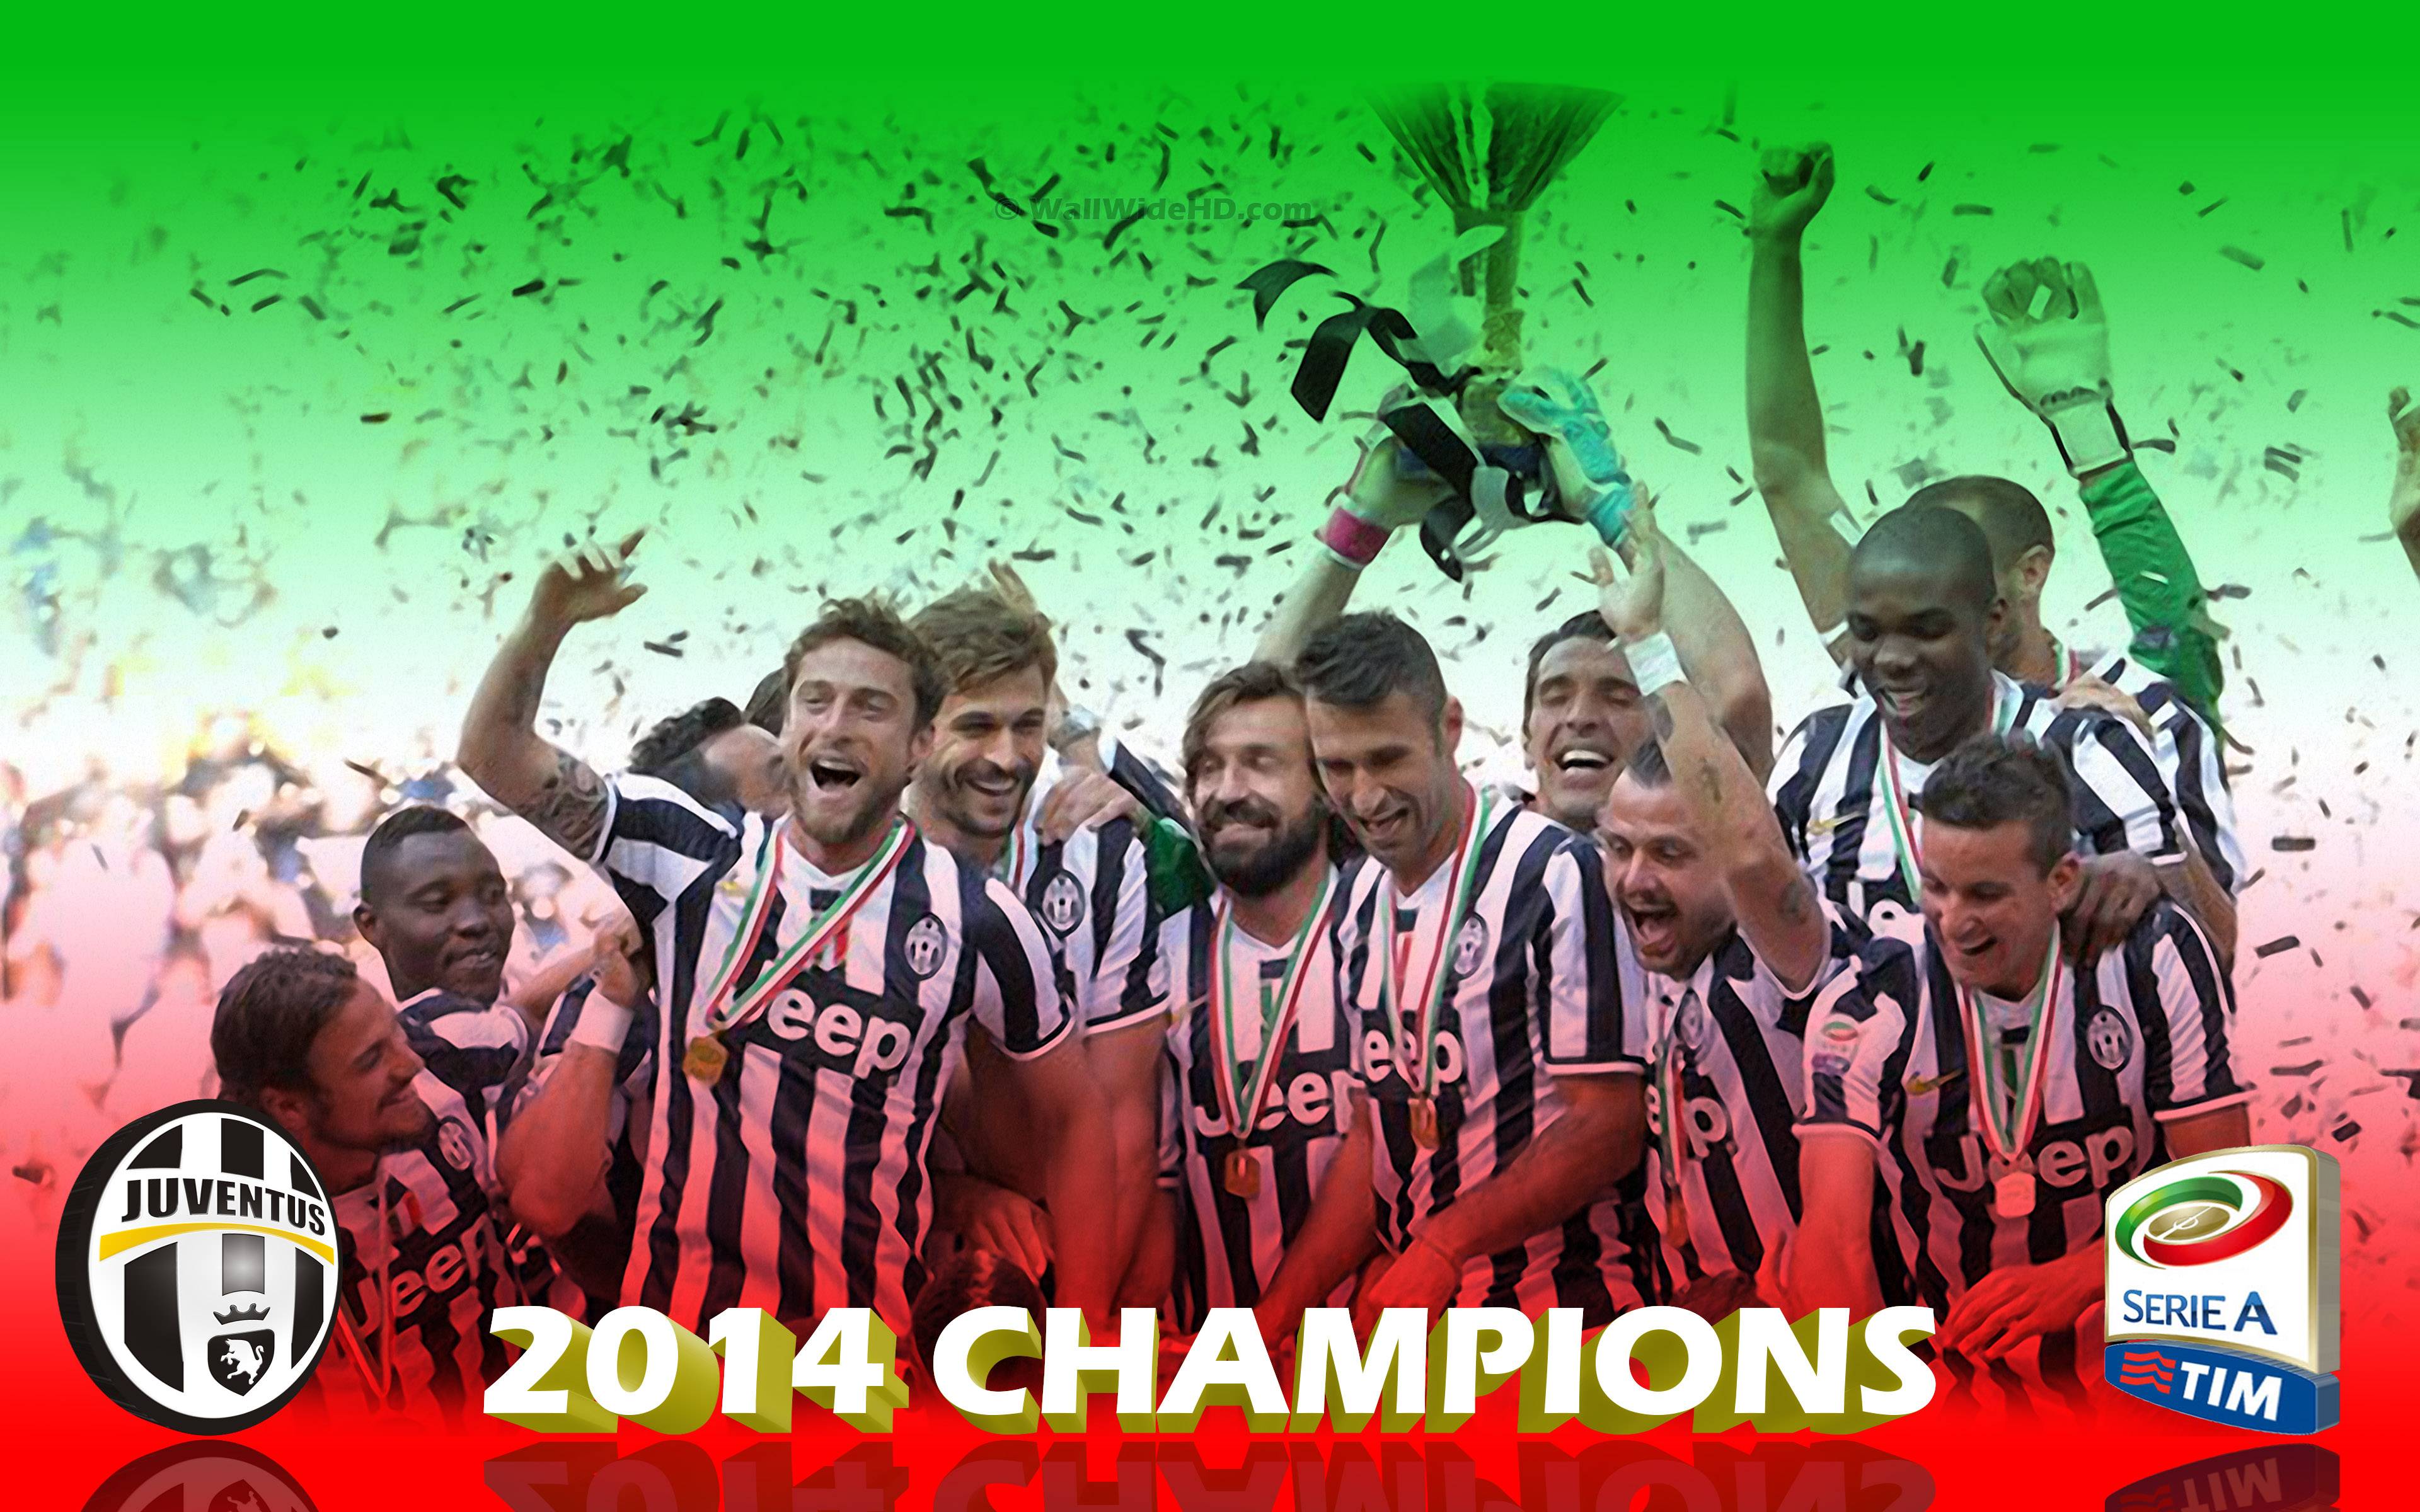 Juventus Torino 2014 Serie A Champions Wallpaper Wide or HD